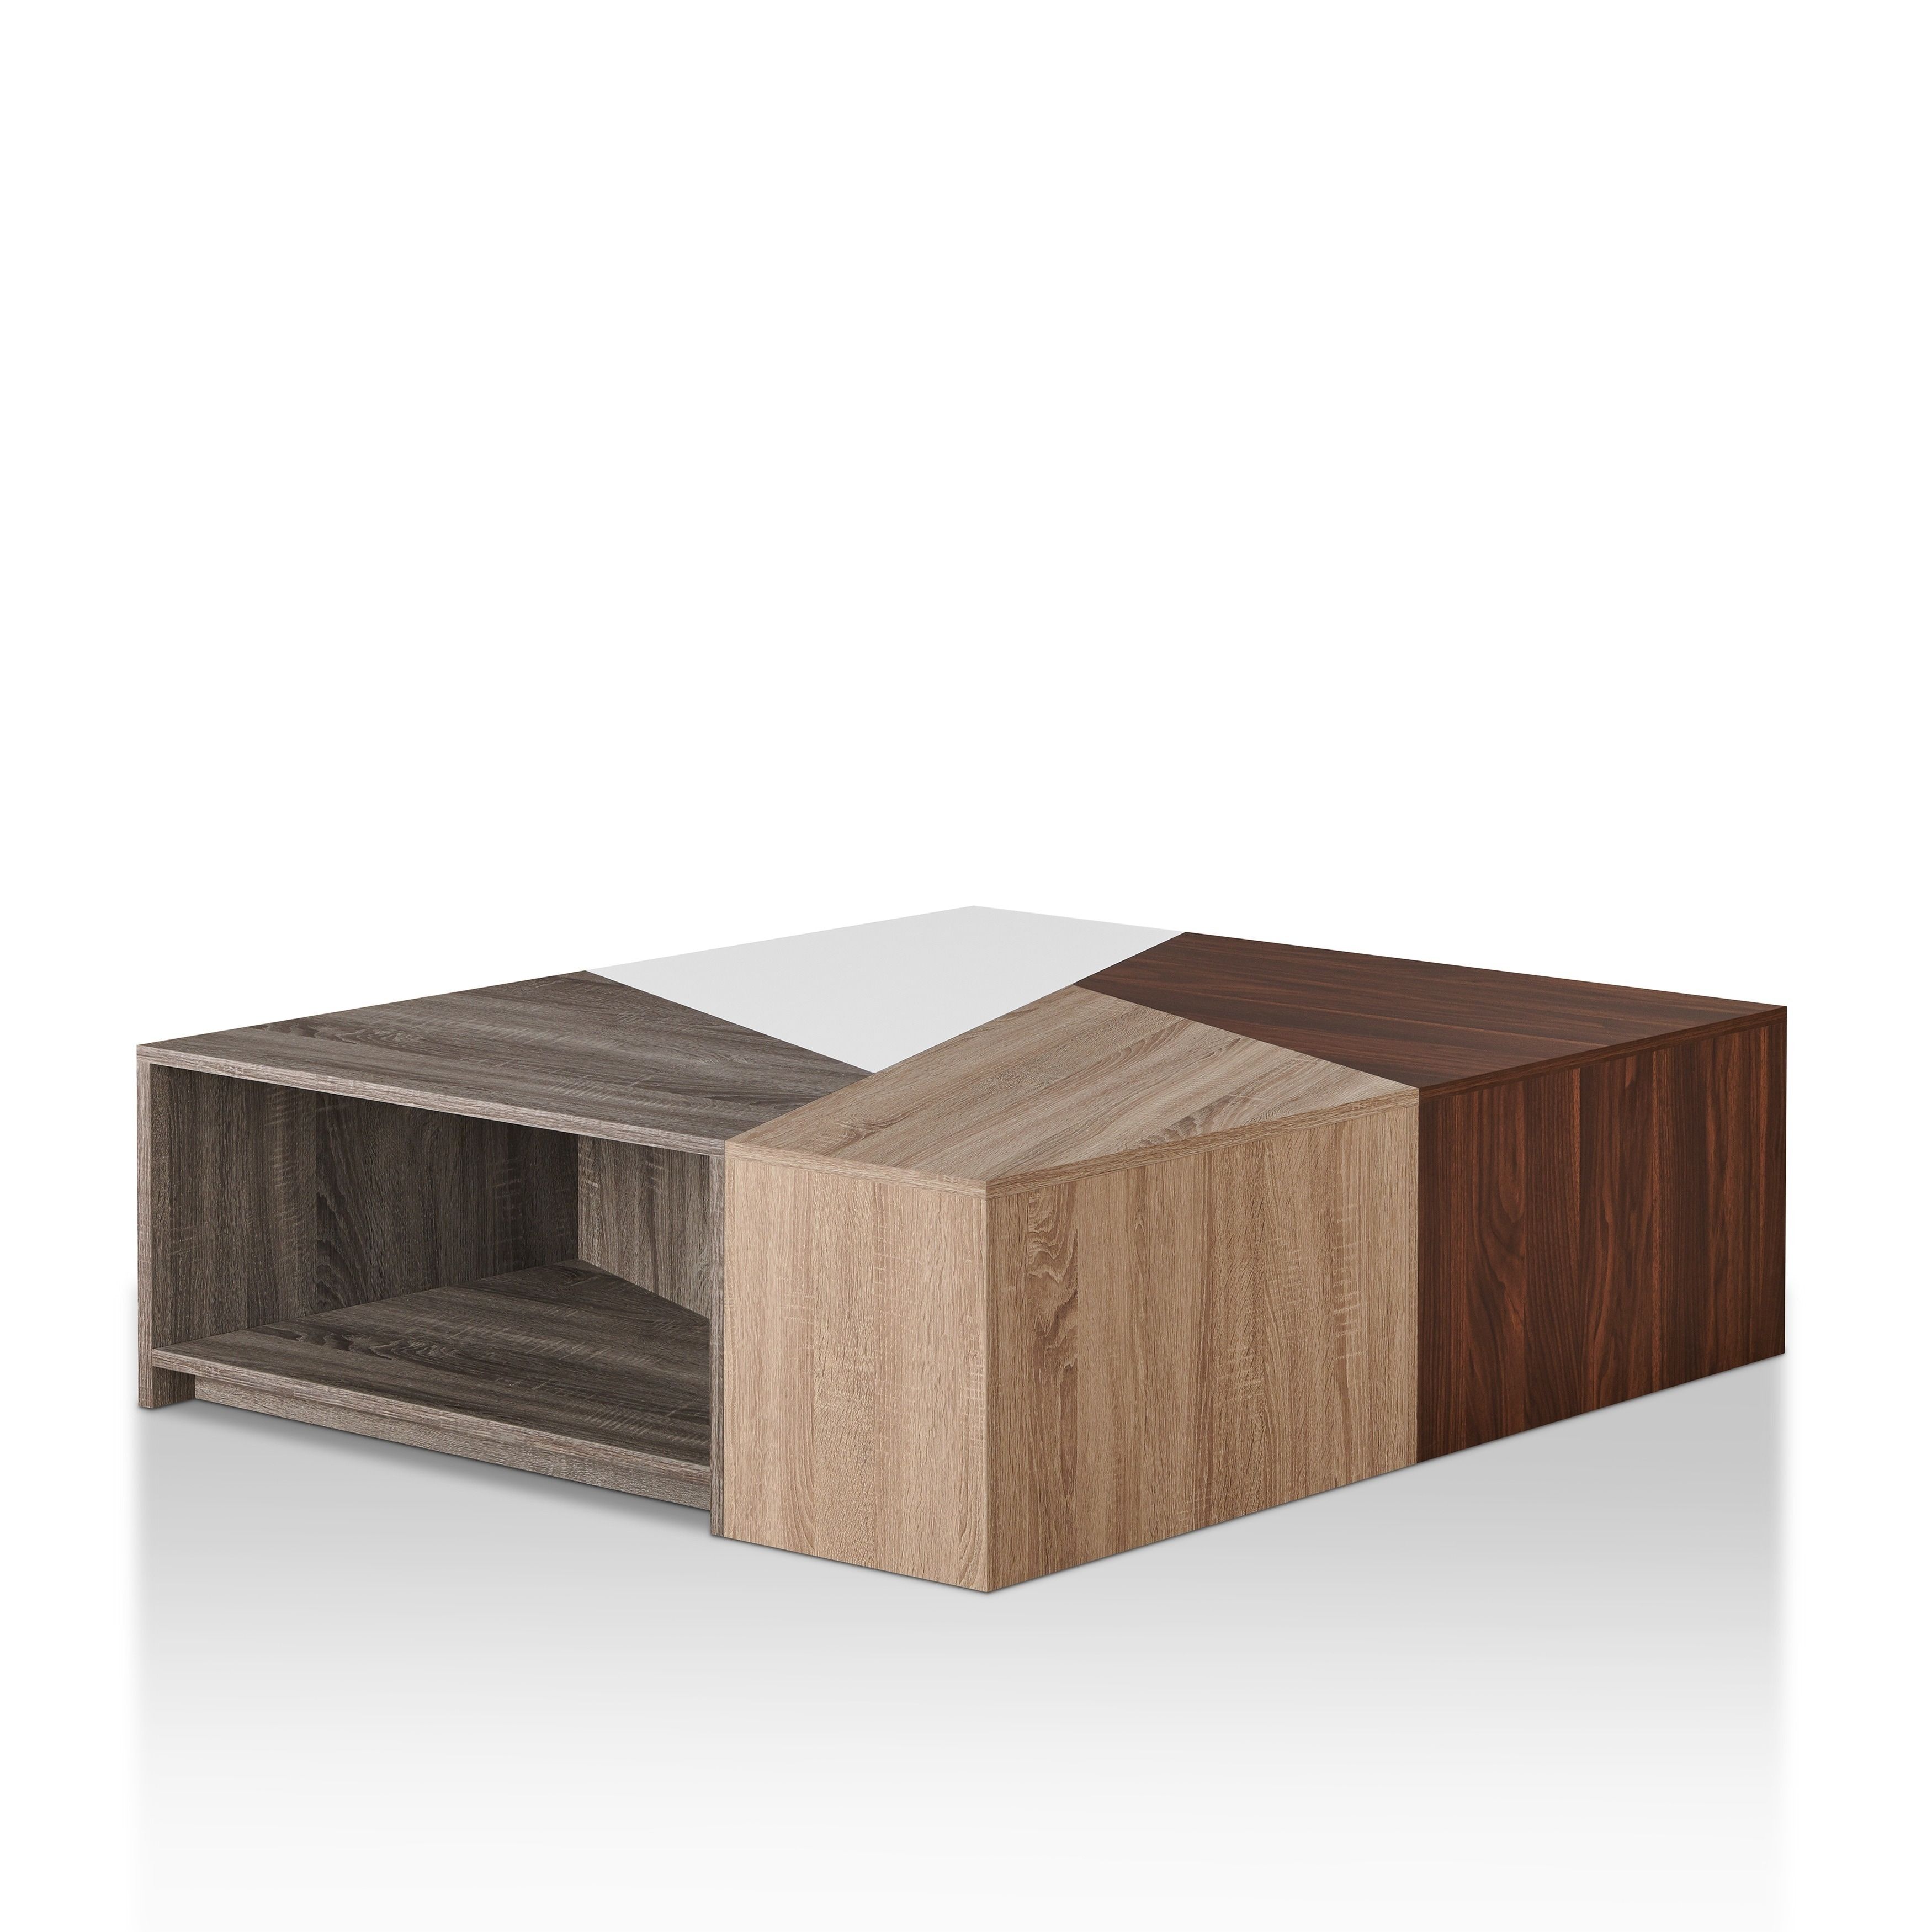 Shop Furniture Of America Deron Contemporary Multi Colored Modular Pertaining To Modular Coffee Tables (View 11 of 30)